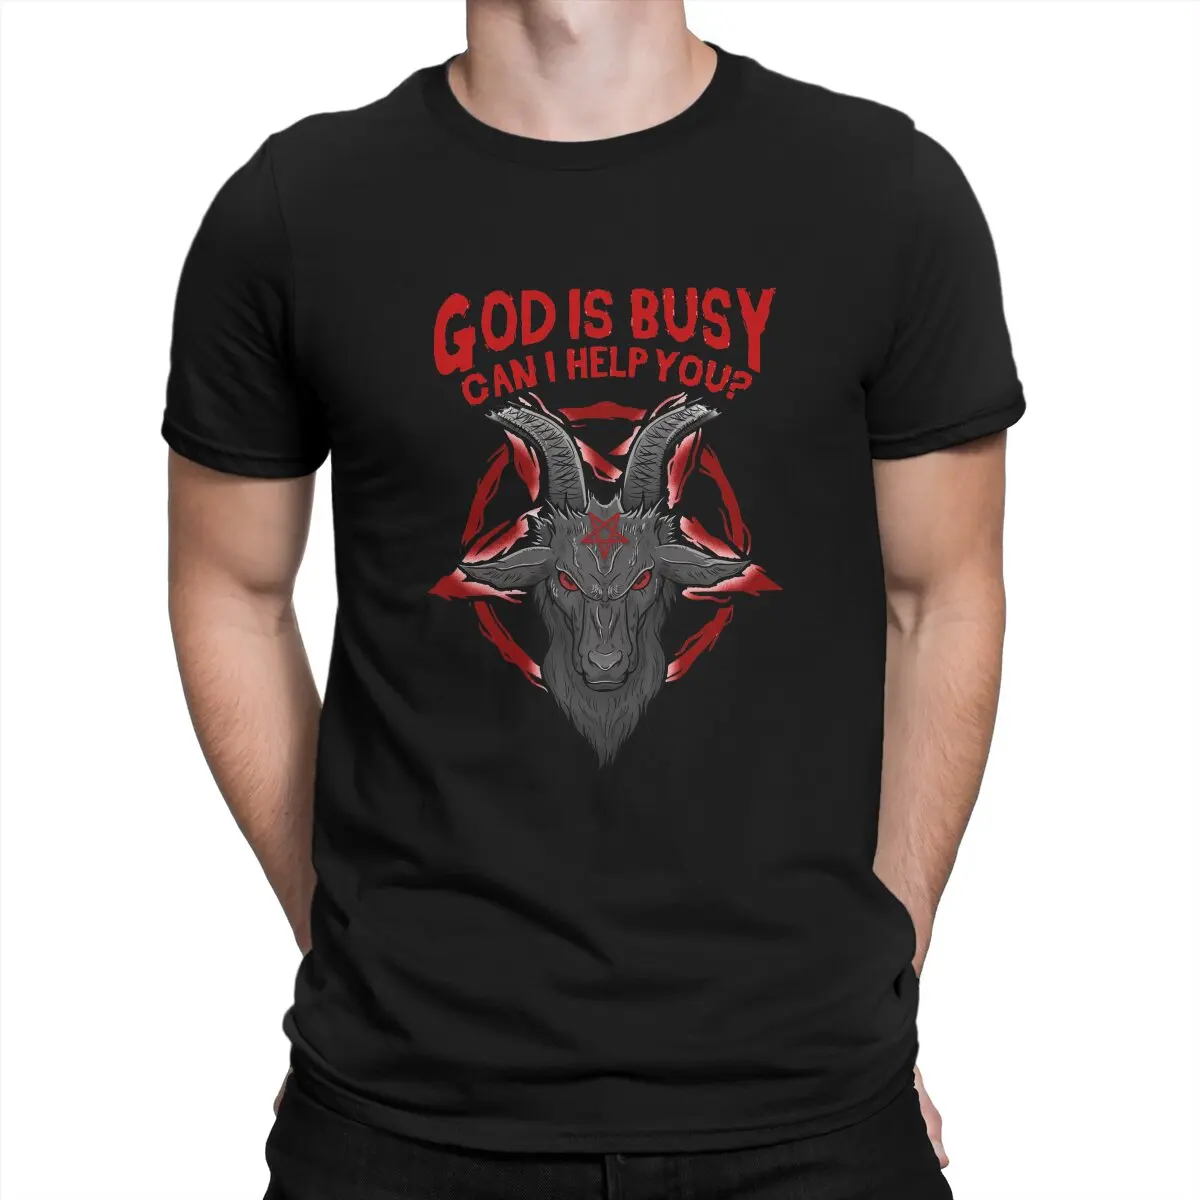 

Baphomet Satan Lucifer TShirt God Is Busy Can I Help You Occult Classic T Shirt Oversized Men Clothes New Design Big Sale